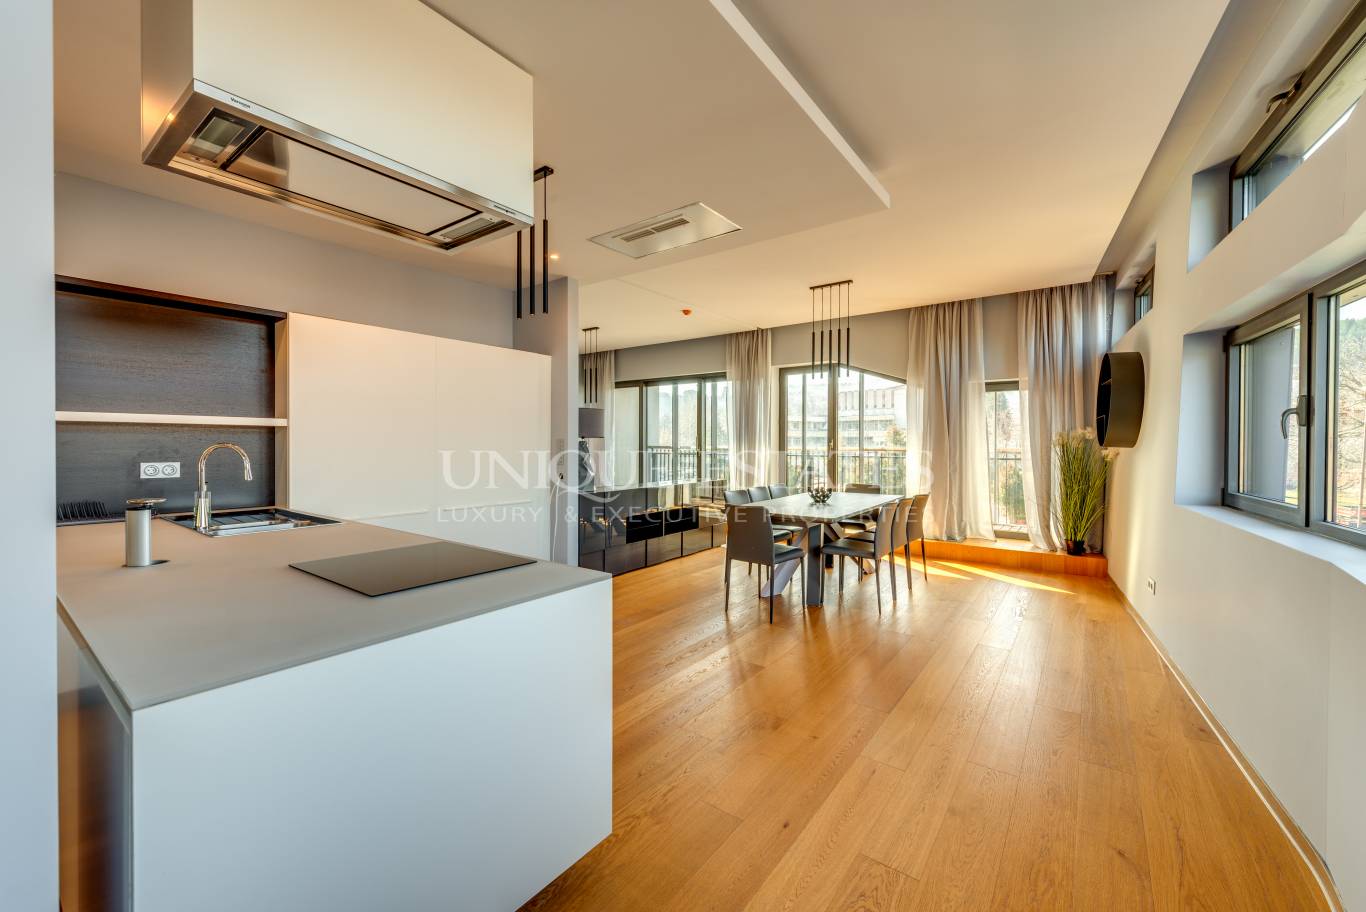 Apartment for sale in Sofia, Pancharevo with listing ID: K14508 - image 5